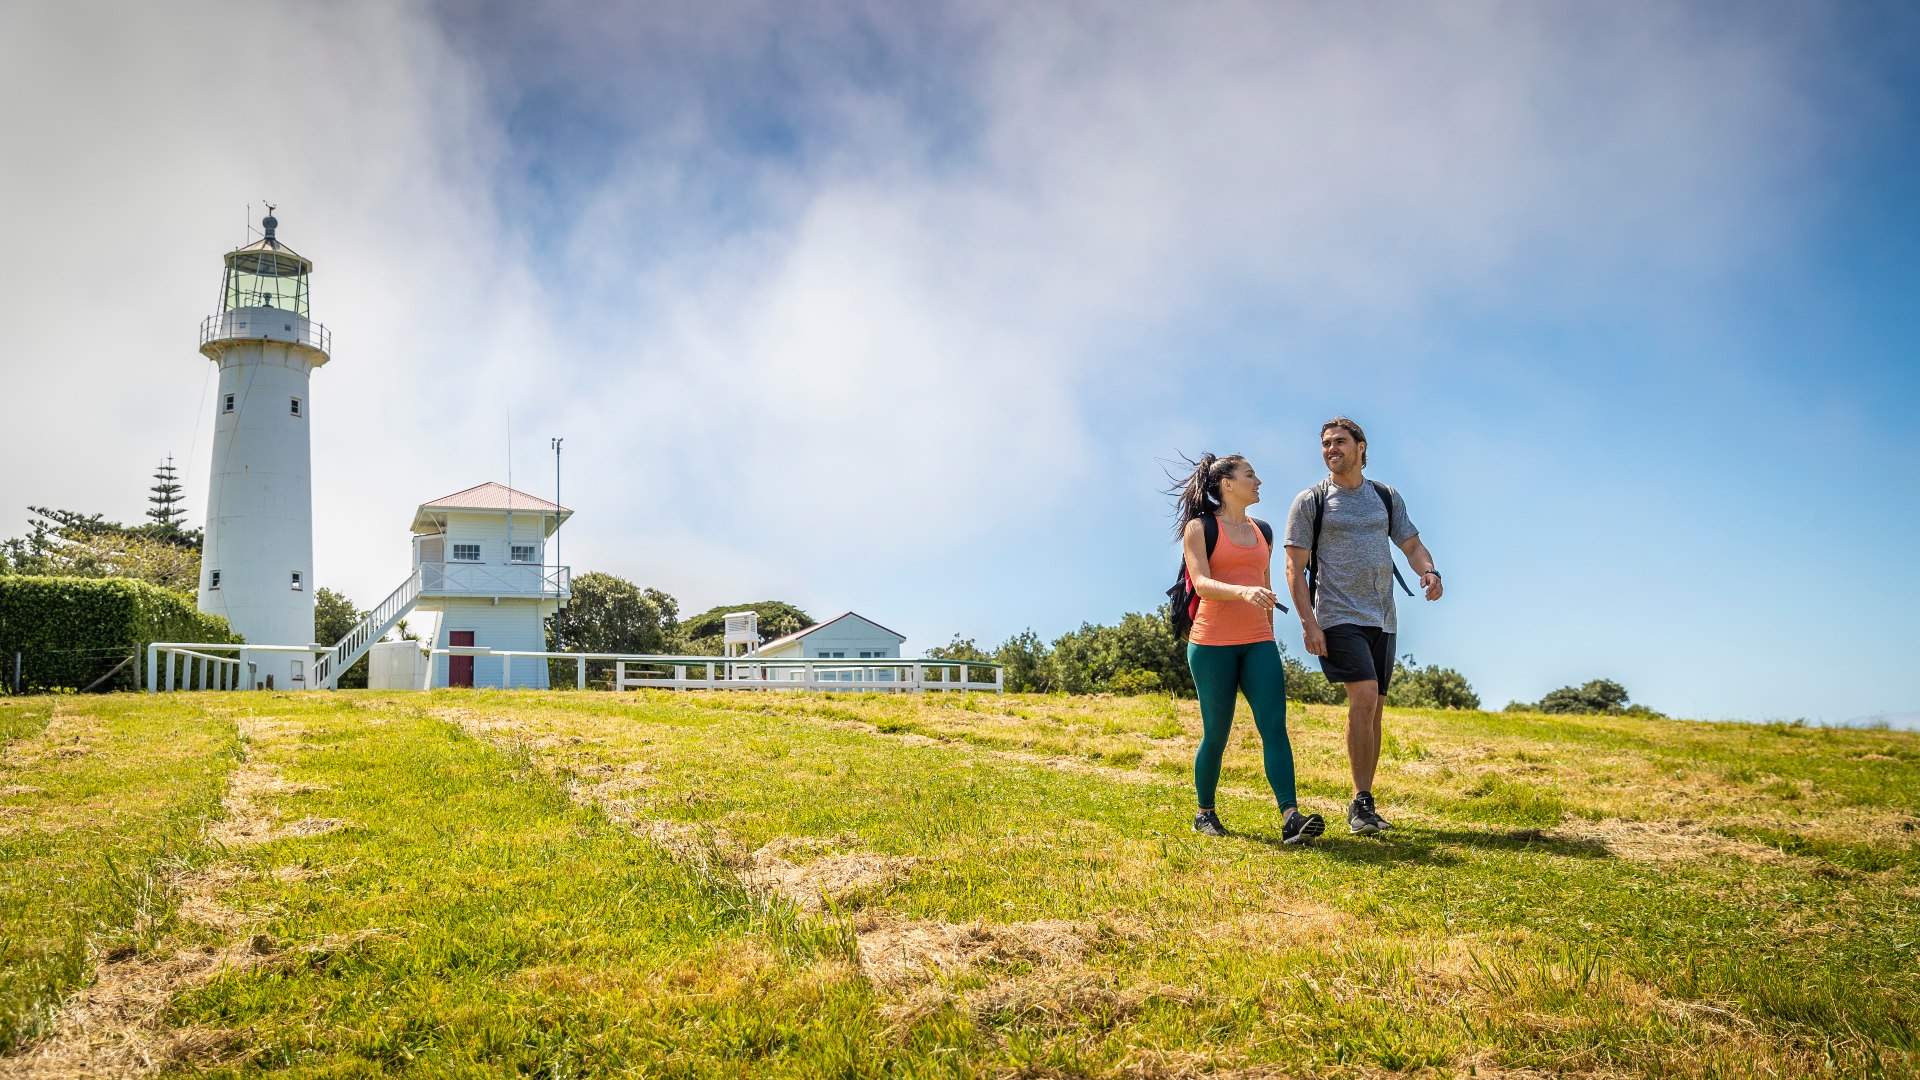 Auckland's Recreational Islands Are Reopening This Weekend for Walks, Swimming and Exploring